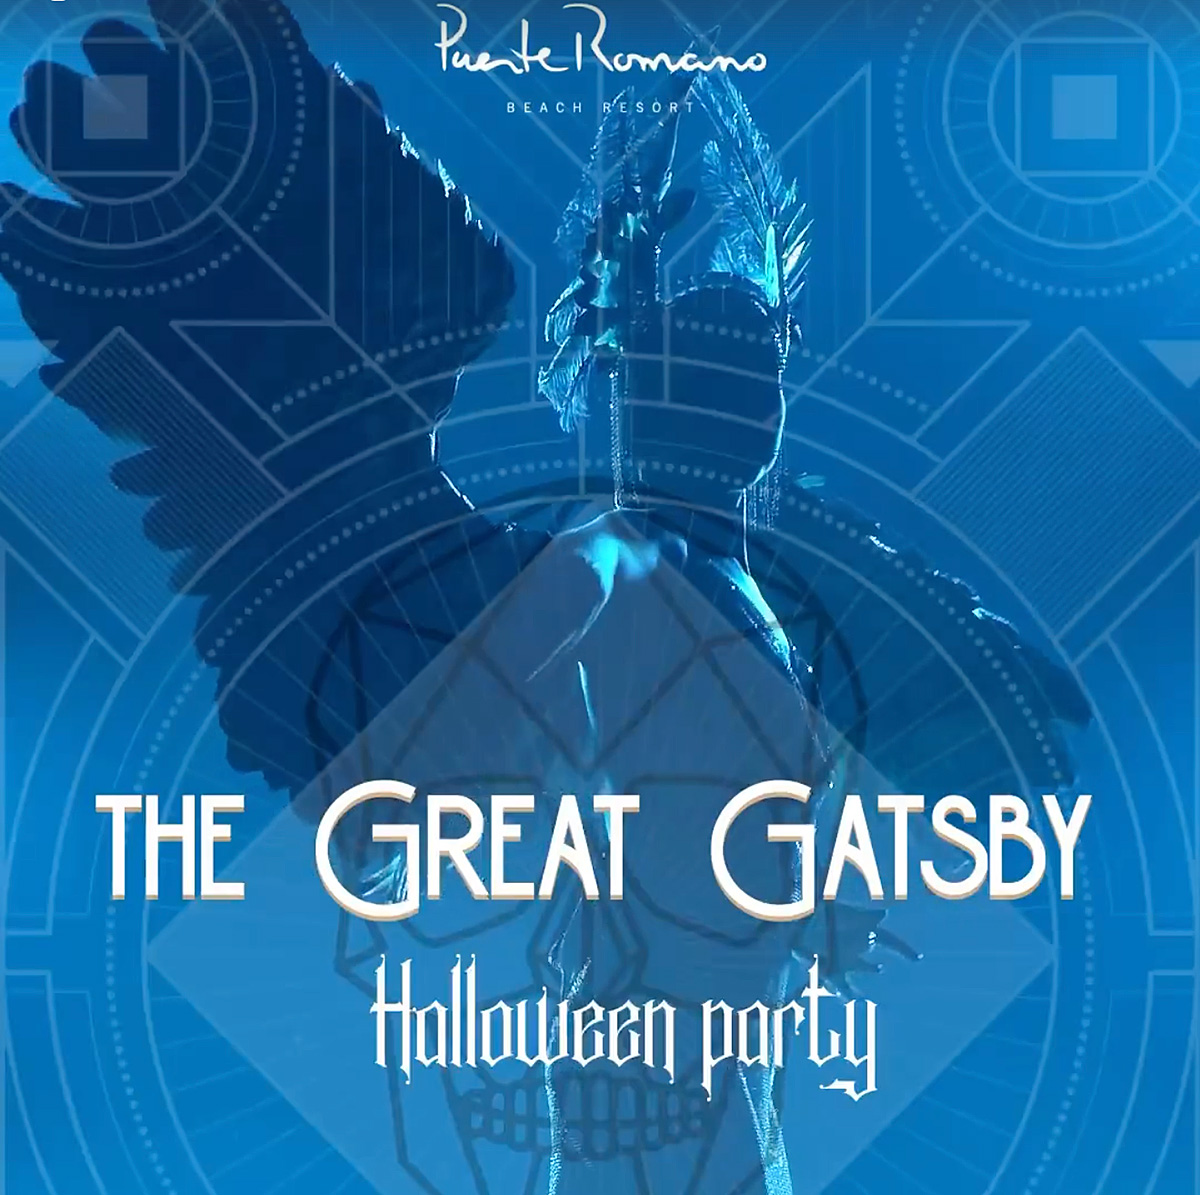 The Great Gatsby Halloween at Puente Romano Beach Resort poster